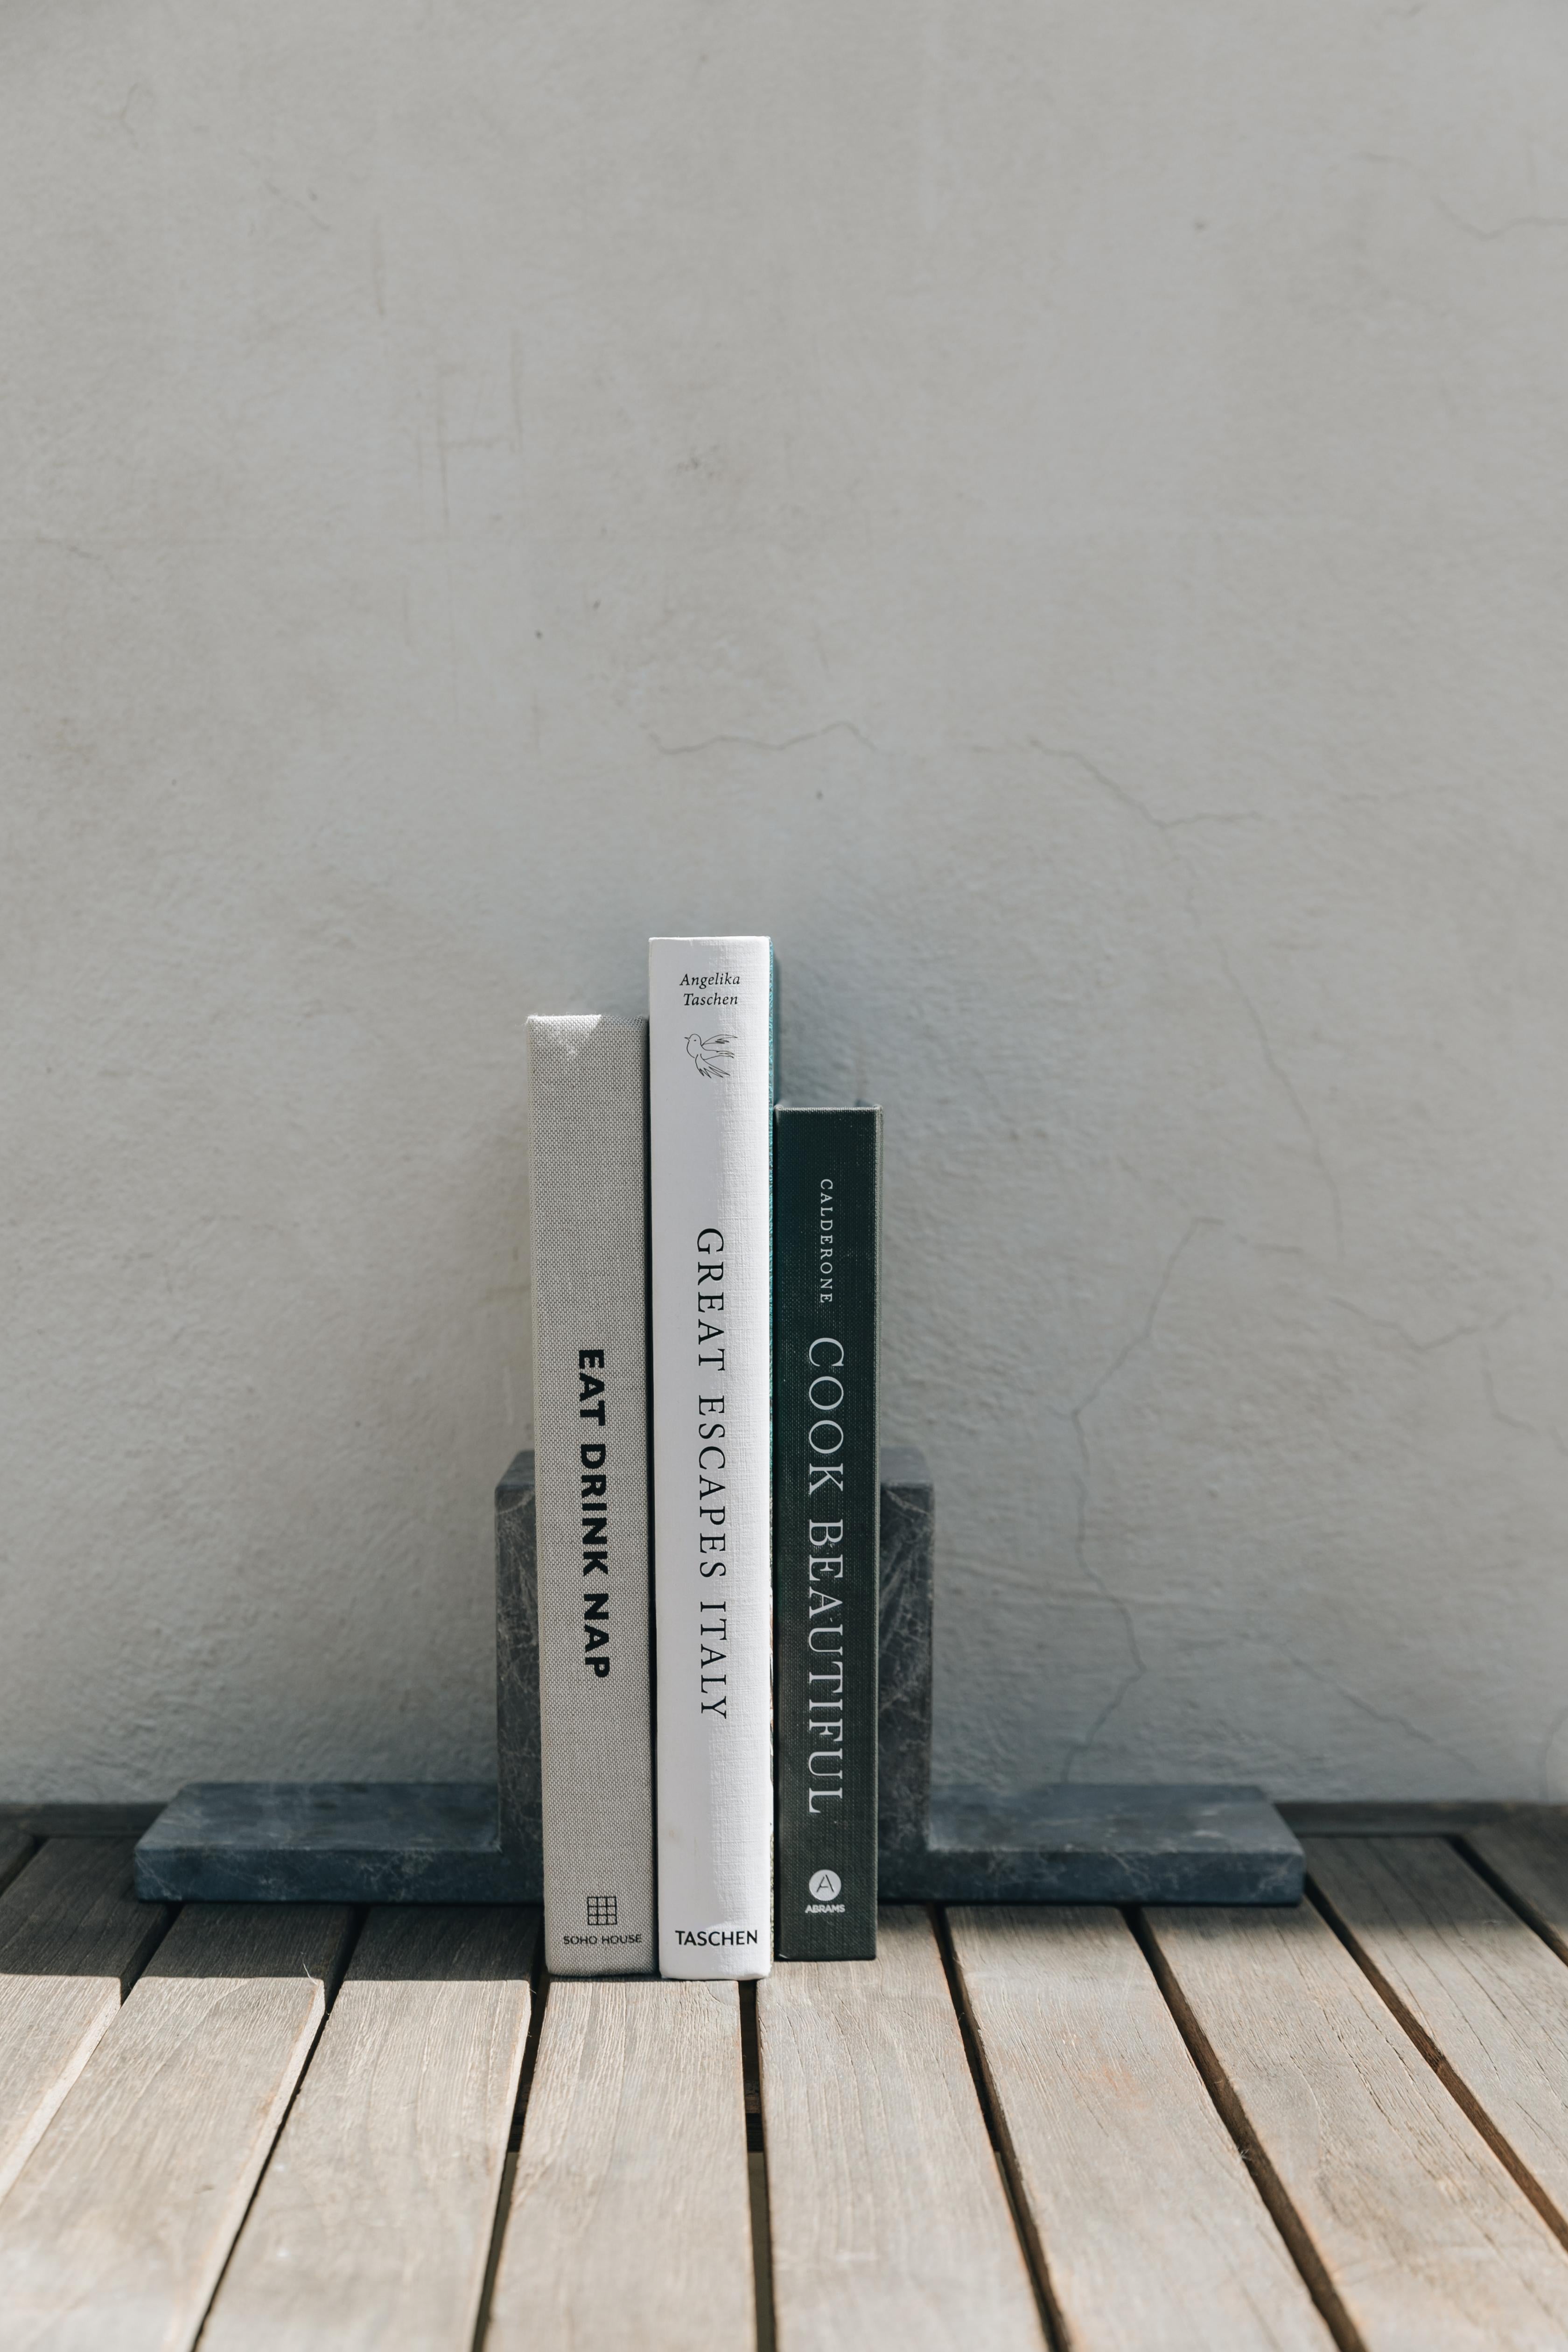 These marble bookends from Casa Almasi are an exquisite addition to any home or event, crafted by skilled Mexican artisans. These bookends are available in five different types of marble, including black Monterrey, white Veneciano, gray Rochelle,